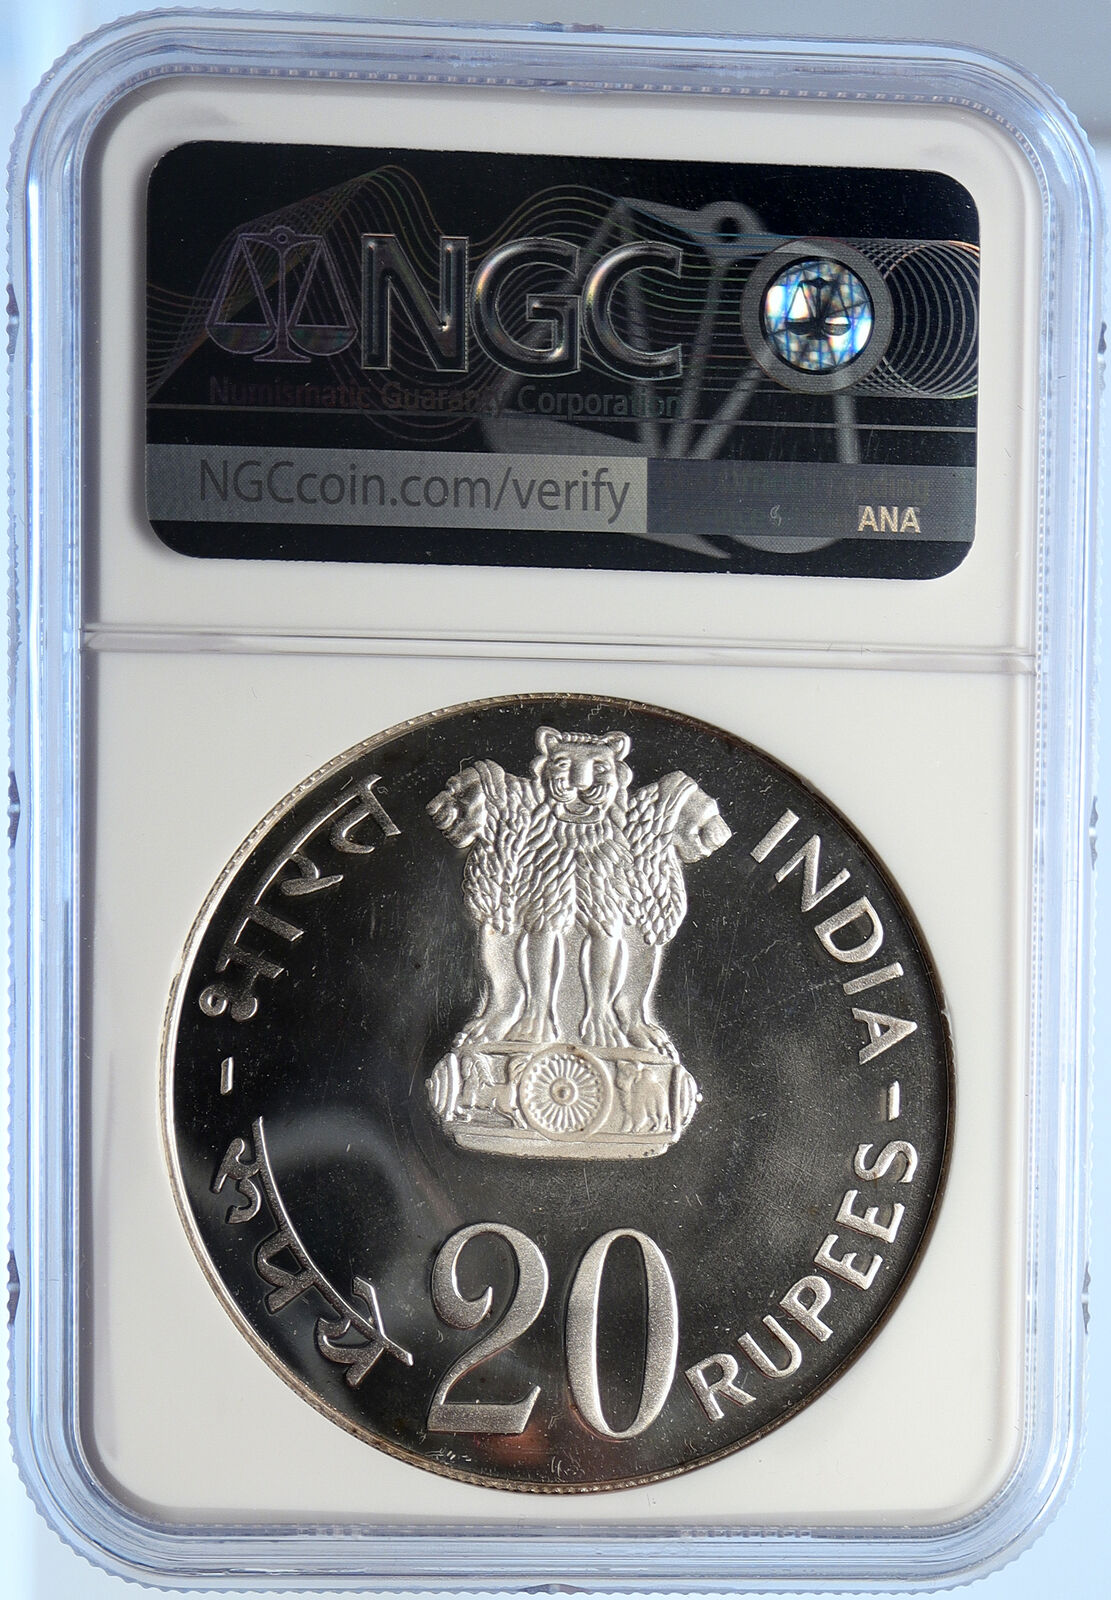 1973 INDIA FAO Grow More Food Wheat Lion Proof Silver 20 Rupee Coin NGC i106529